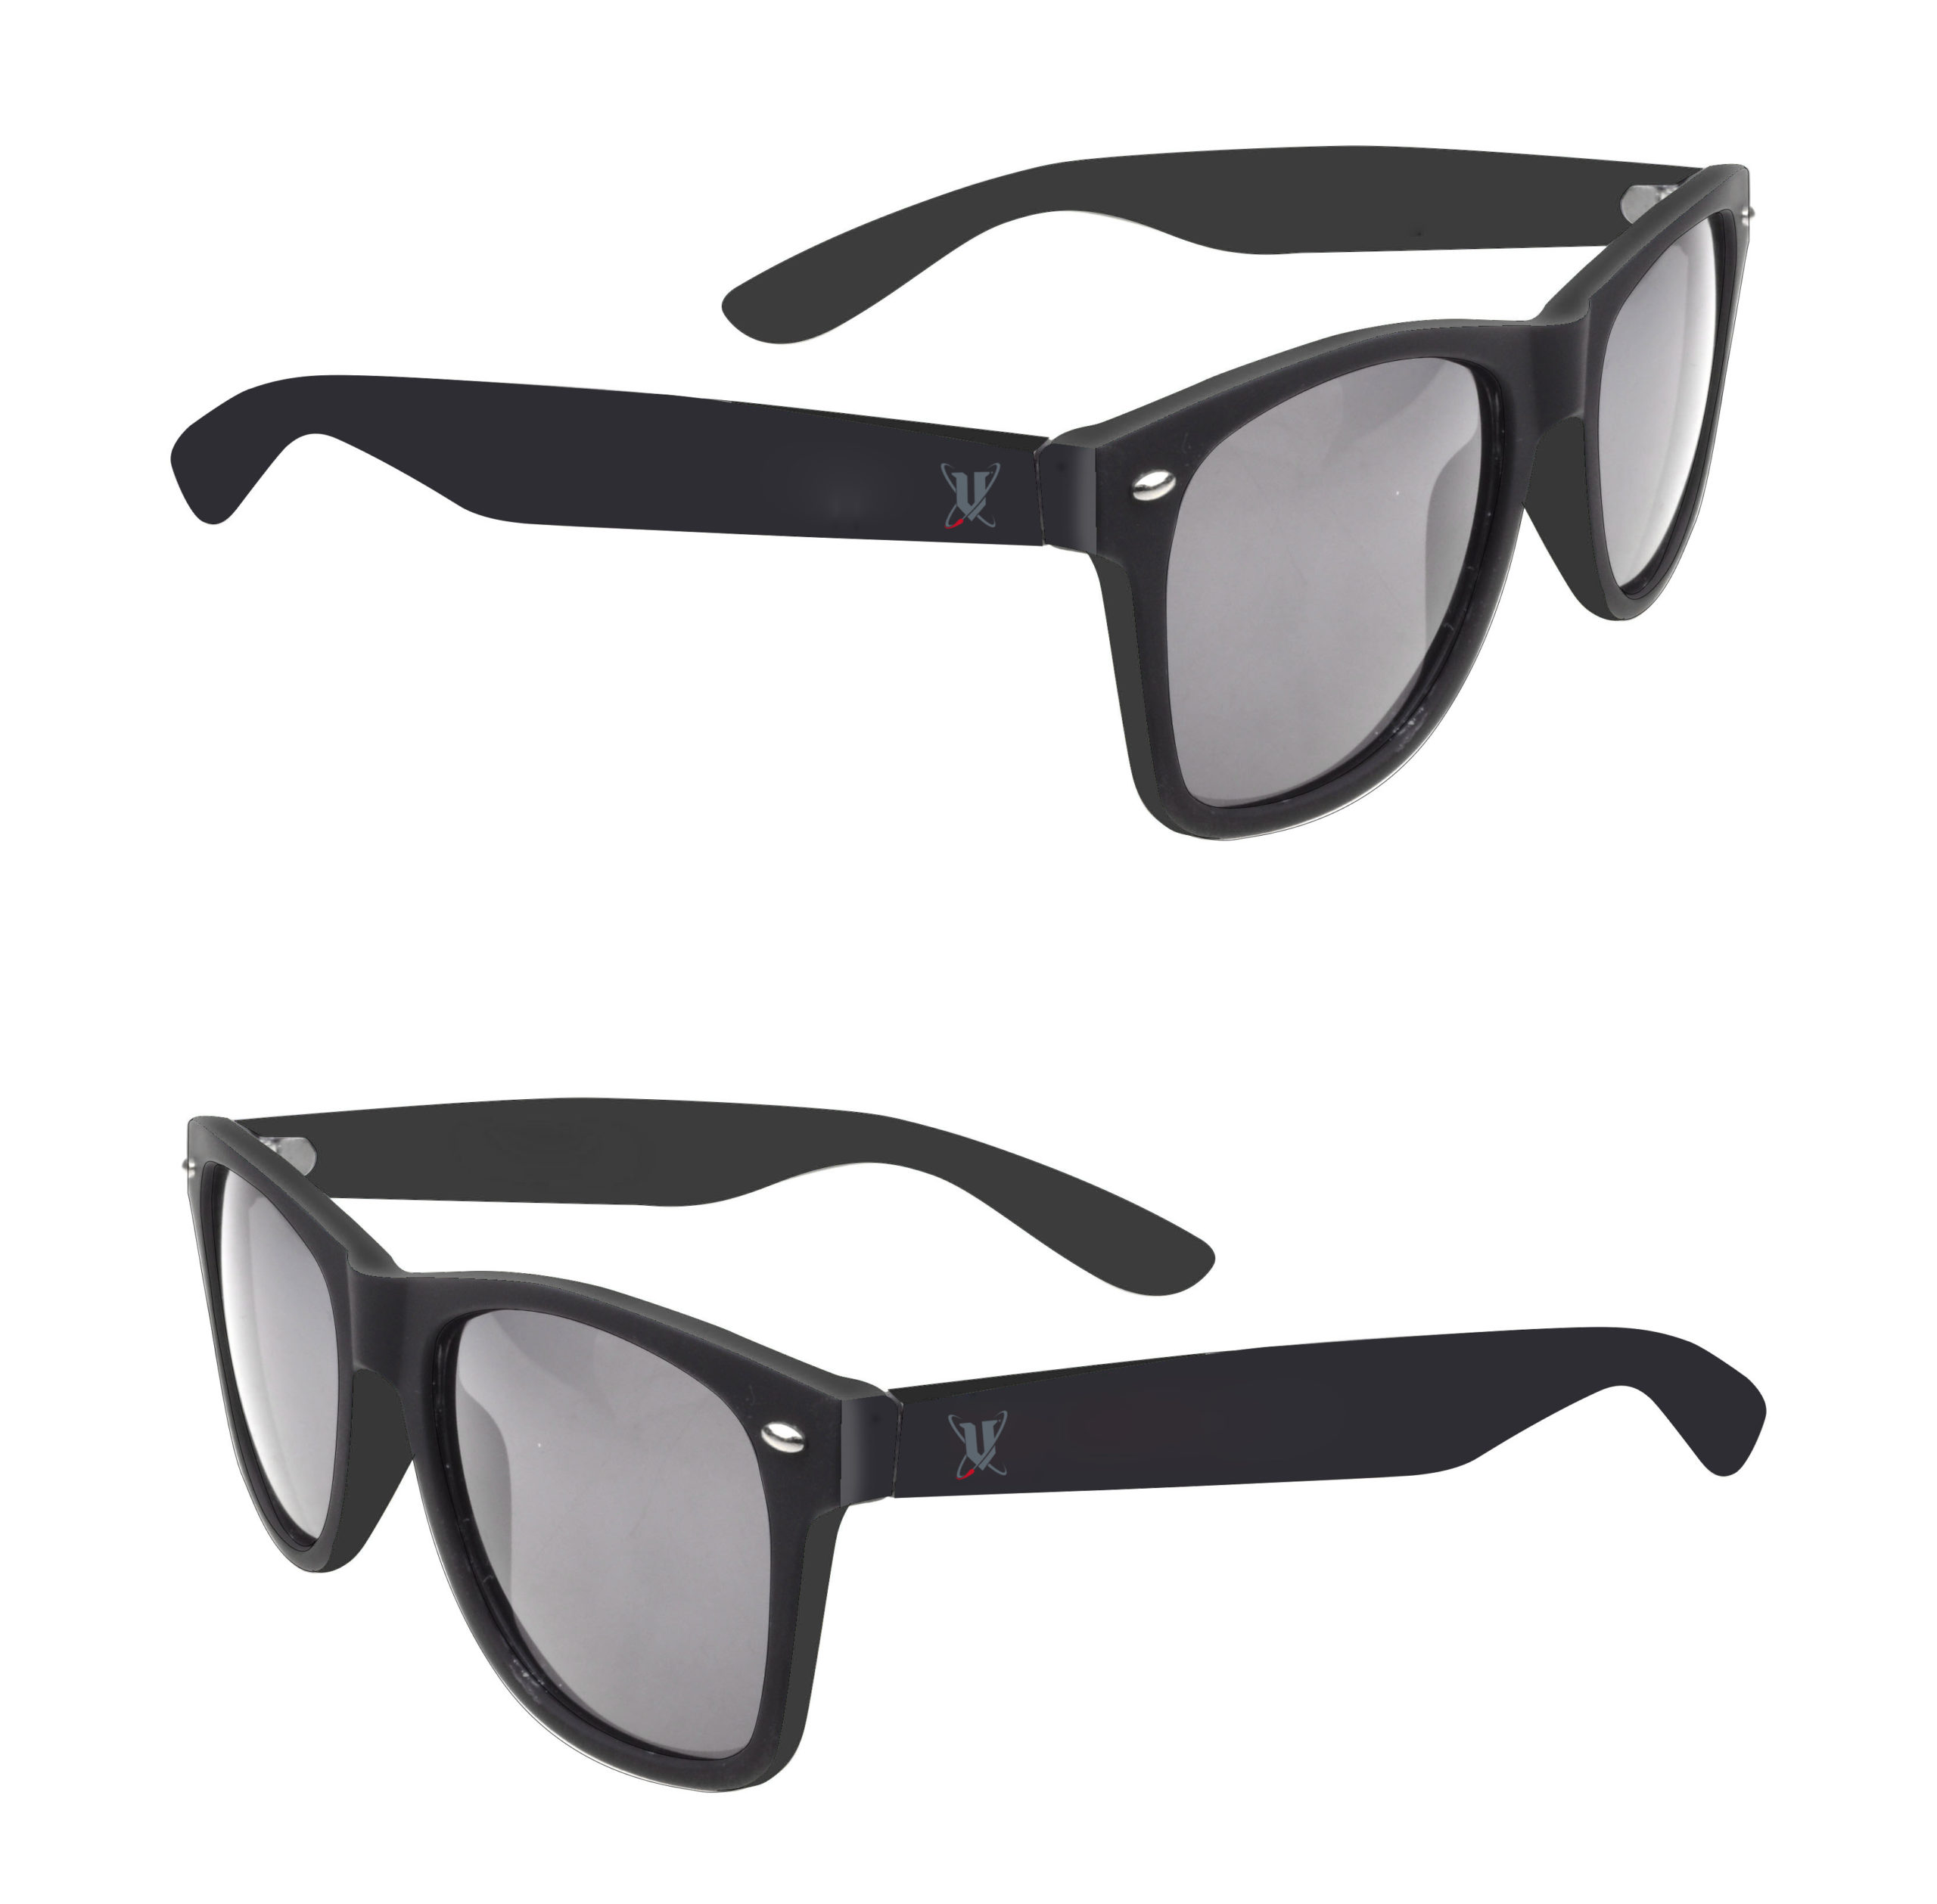 Promotional Products - branded V sunnies